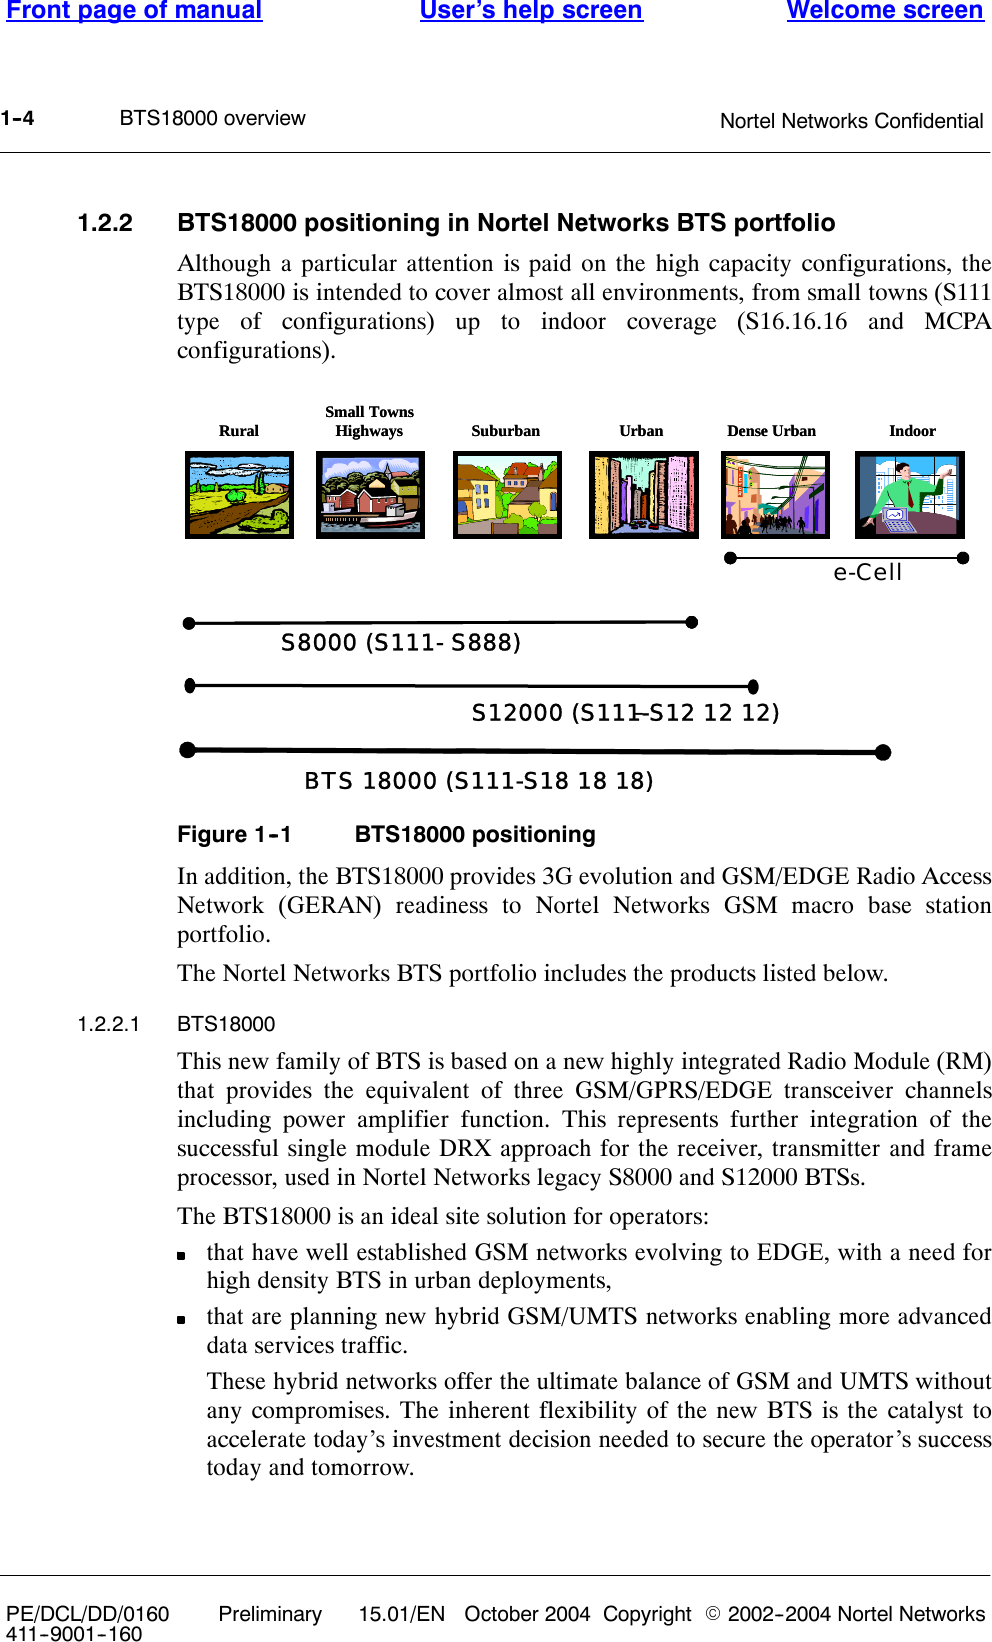 BTS18000 overviewFront page of manual Welcome screenUser’s help screenNortel Networks Confidential1--4PE/DCL/DD/0160411--9001--160Preliminary 15.01/EN October 2004 Copyright E2002--2004 Nortel Networks1.2.2 BTS18000 positioning in Nortel Networks BTS portfolioAlthough a particular attention is paid on the high capacity configurations, theBTS18000 is intended to cover almost all environments, from small towns (S111type of configurations) up to indoor coverage (S16.16.16 and MCPAconfigurations).  e-CellS12000 (S111-S12 12 12)–Rural Small TownsHighways Suburban IndoorUrban Dense Urban S8000 (S111- S888)  BTS 18000 (S111-S18 18 18) –Rural Small TownsHighways Suburban IndoorUrban Dense Urban Figure 1--1 BTS18000 positioningIn addition, the BTS18000 provides 3G evolution and GSM/EDGE Radio AccessNetwork (GERAN) readiness to Nortel Networks GSM macro base stationportfolio.The Nortel Networks BTS portfolio includes the products listed below.1.2.2.1 BTS18000This new family of BTS is based on a new highly integrated Radio Module (RM)that provides the equivalent of three GSM/GPRS/EDGE transceiver channelsincluding power amplifier function. This represents further integration of thesuccessful single module DRX approach for the receiver, transmitter and frameprocessor, used in Nortel Networks legacy S8000 and S12000 BTSs.The BTS18000 is an ideal site solution for operators:that have well established GSM networks evolving to EDGE, with a need forhigh density BTS in urban deployments,that are planning new hybrid GSM/UMTS networks enabling more advanceddata services traffic.These hybrid networks offer the ultimate balance of GSM and UMTS withoutany compromises. The inherent flexibility of the new BTS is the catalyst toaccelerate today’s investment decision needed to secure the operator’s successtoday and tomorrow.